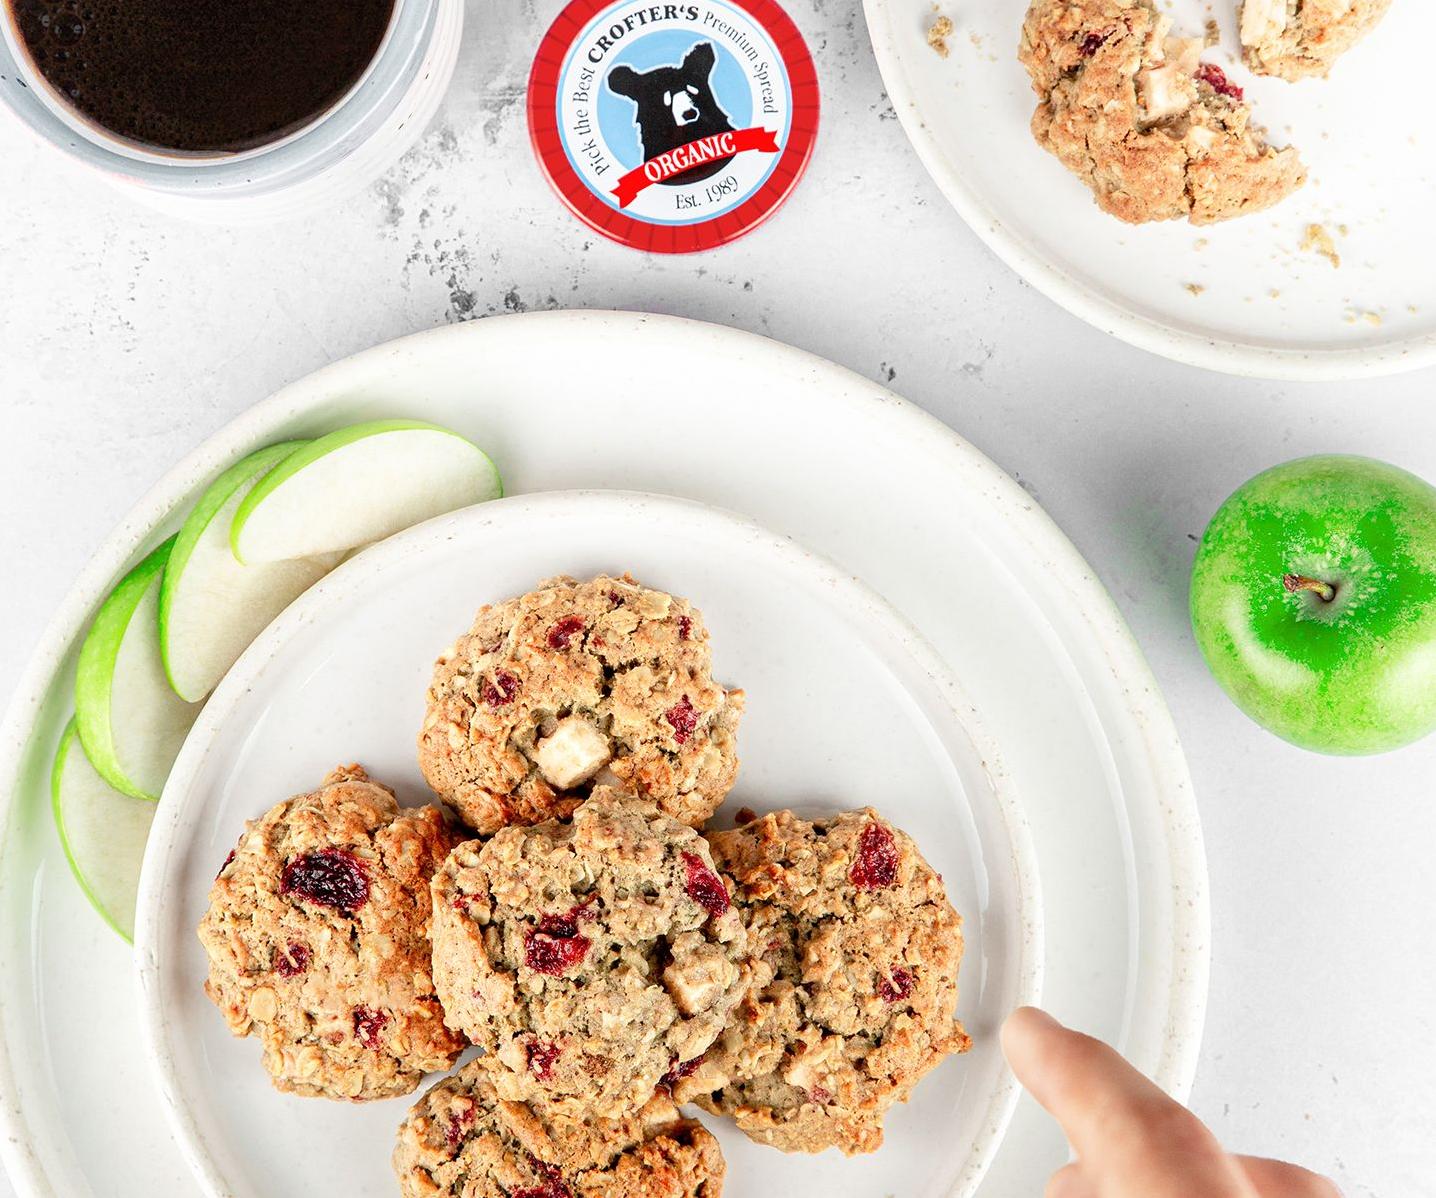  When your sweet tooth needs a little pick-me-up, these Apple Coffee Cookies have got you covered!